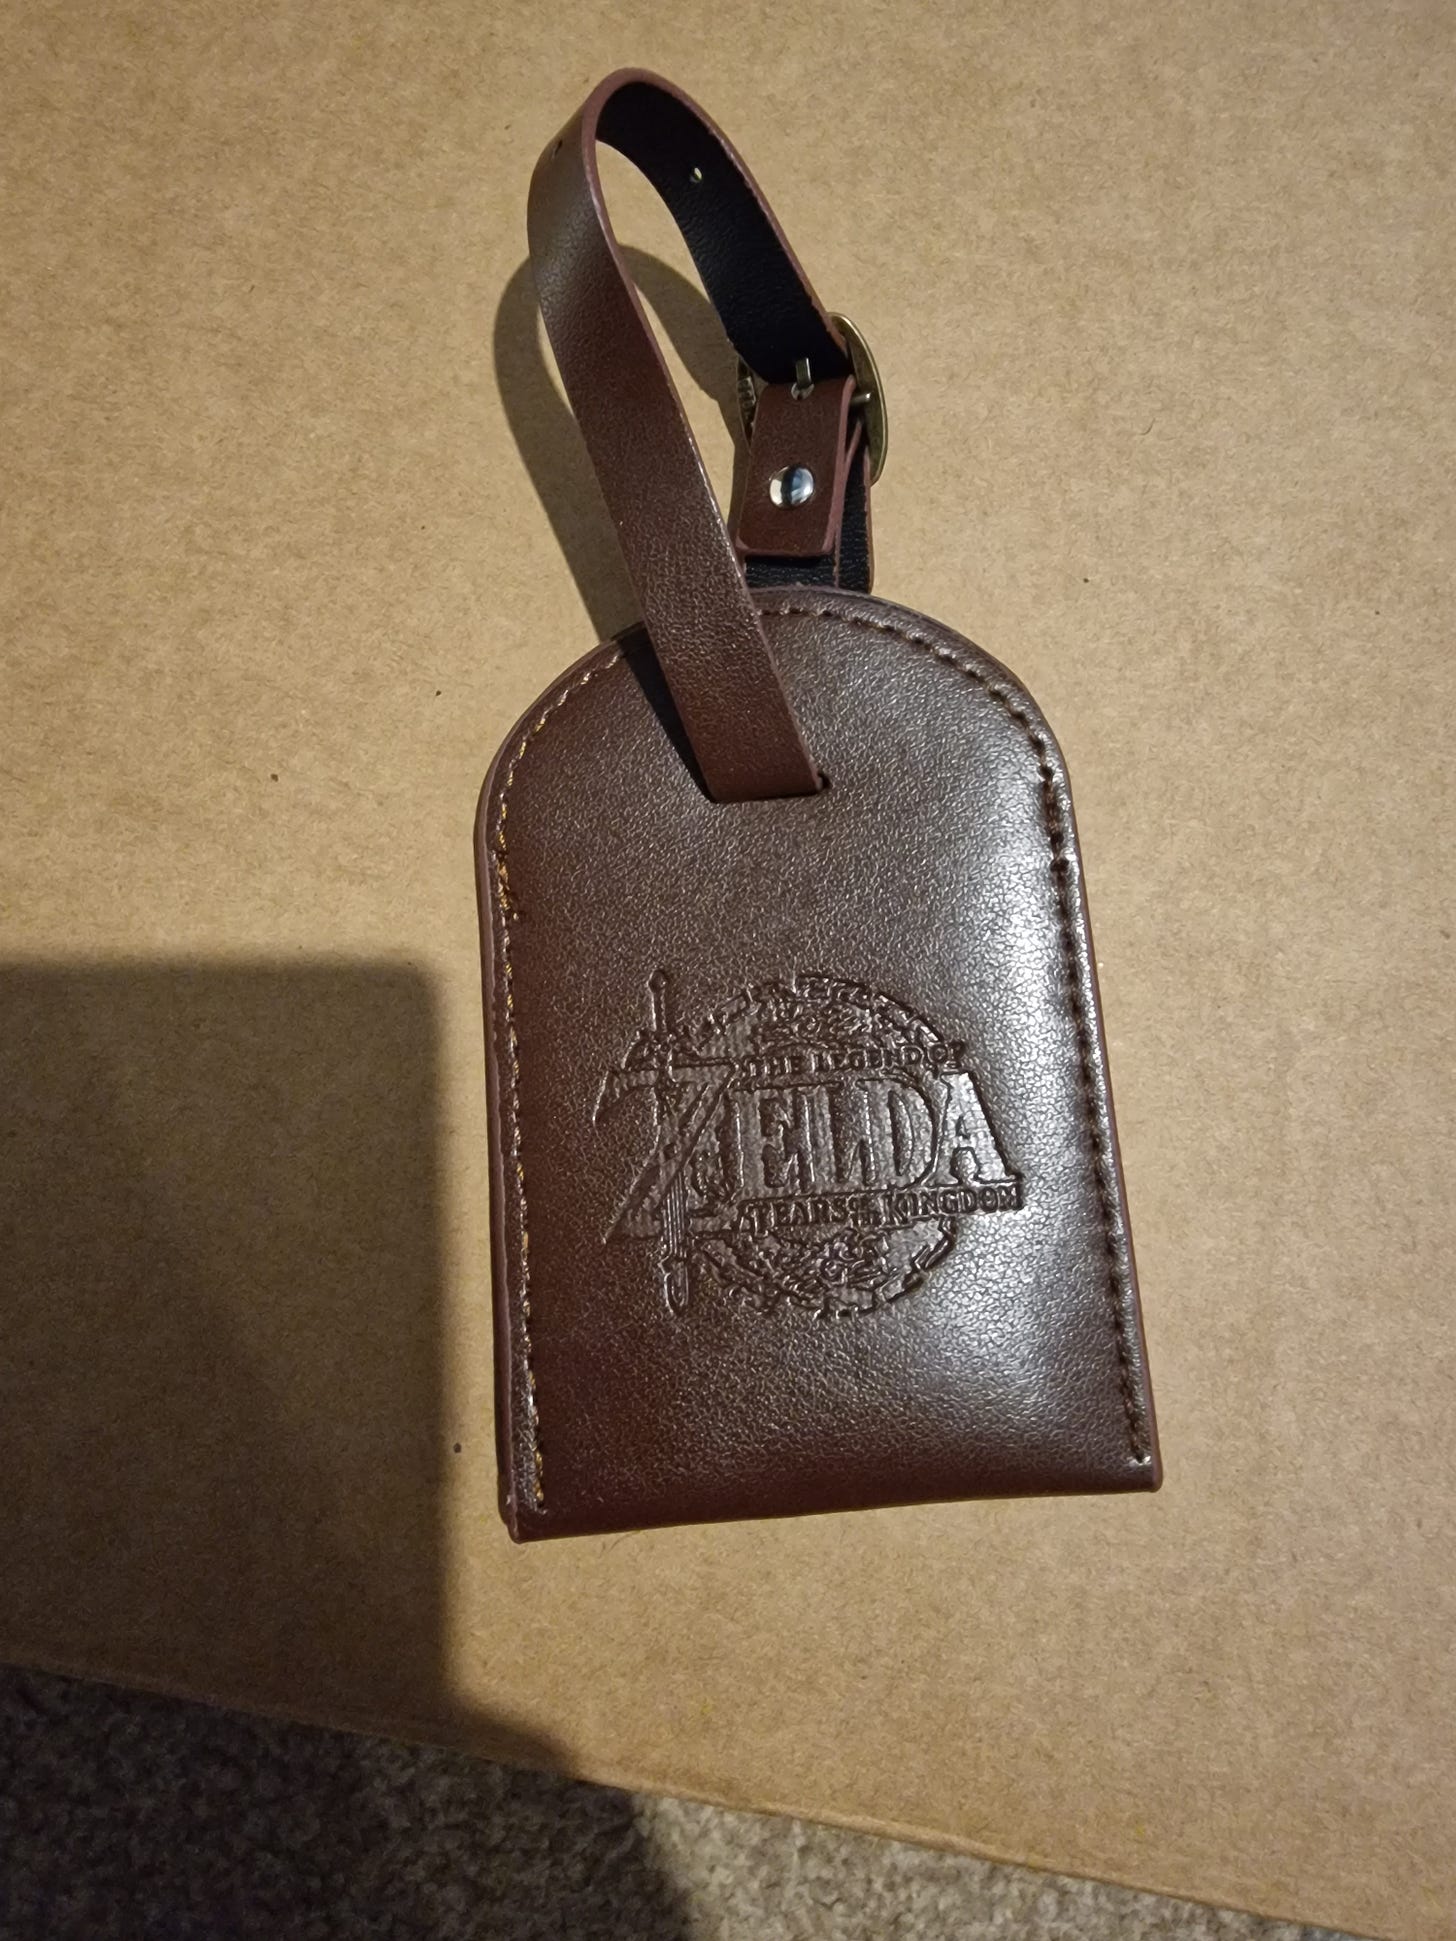 A dark brown leather look luggage tag with the logo embossed on it